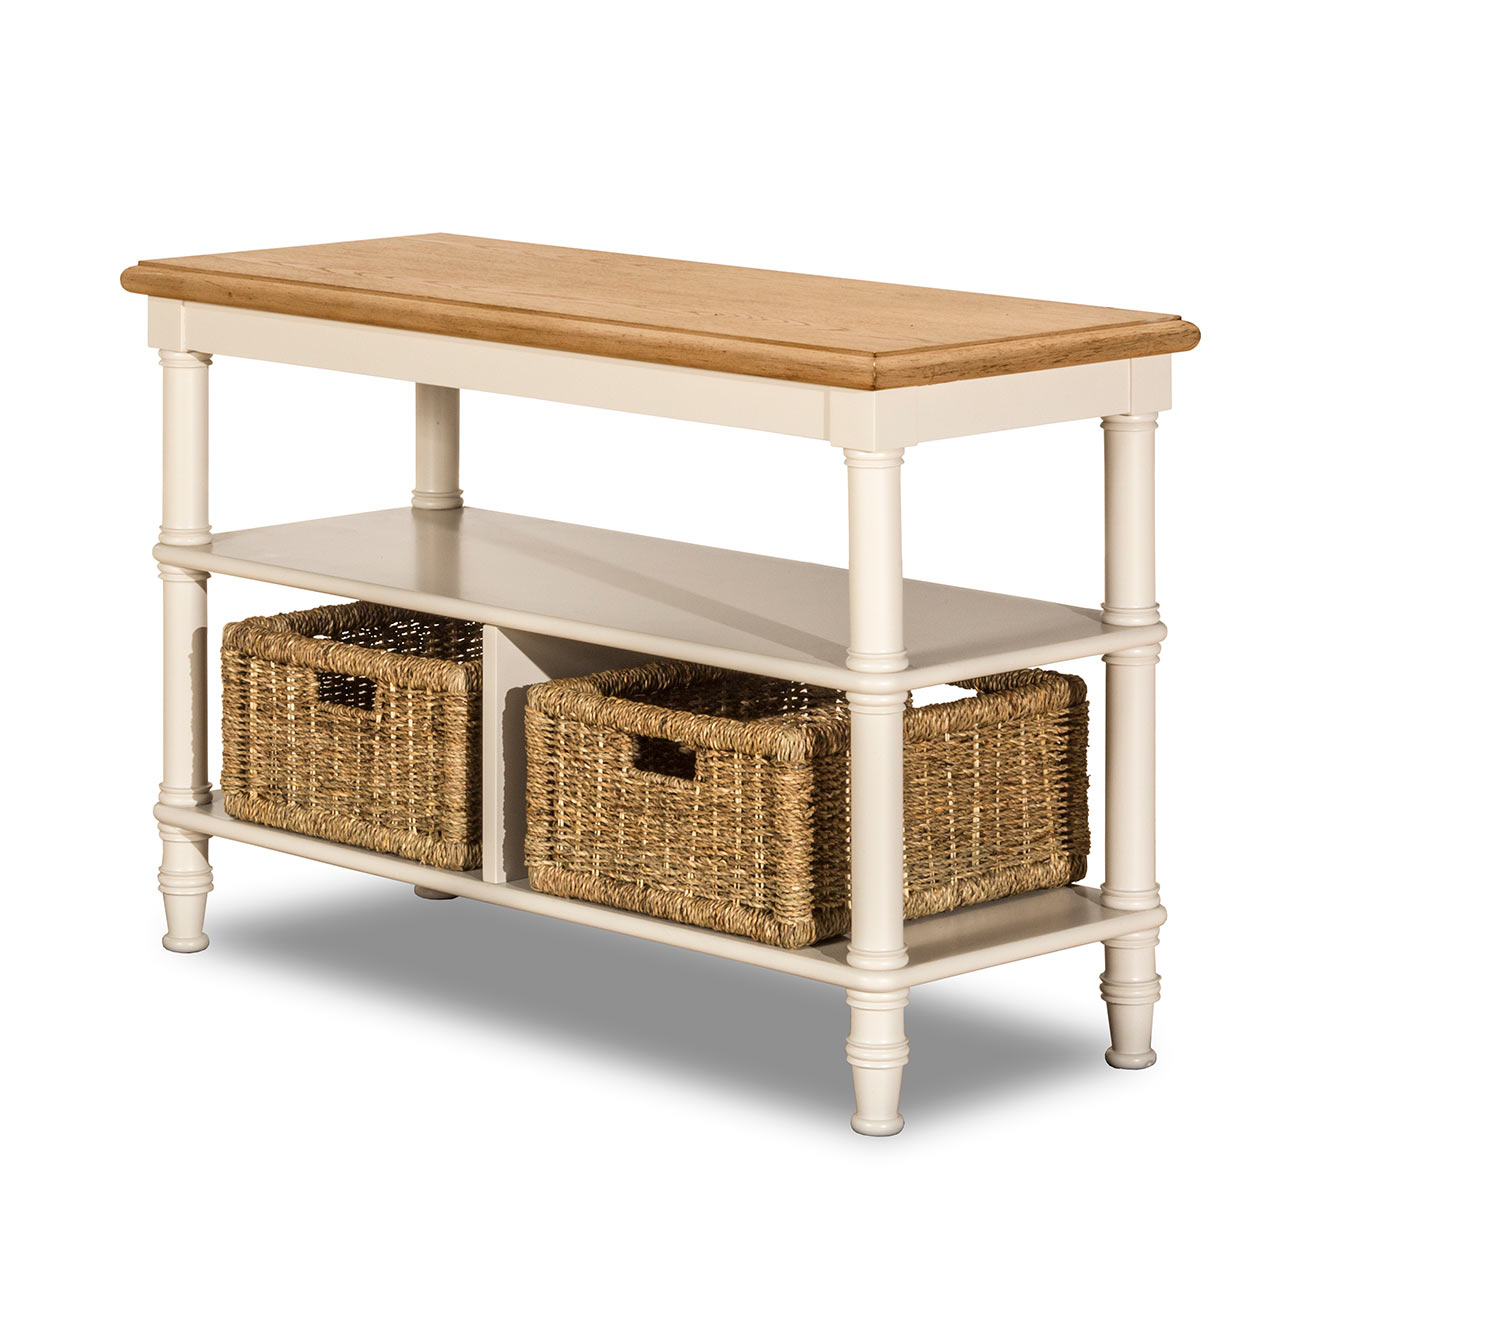 Hillsdale Seneca Basket Stand with 2 Baskets - Driftwood/Sea White/Natural Seagrass